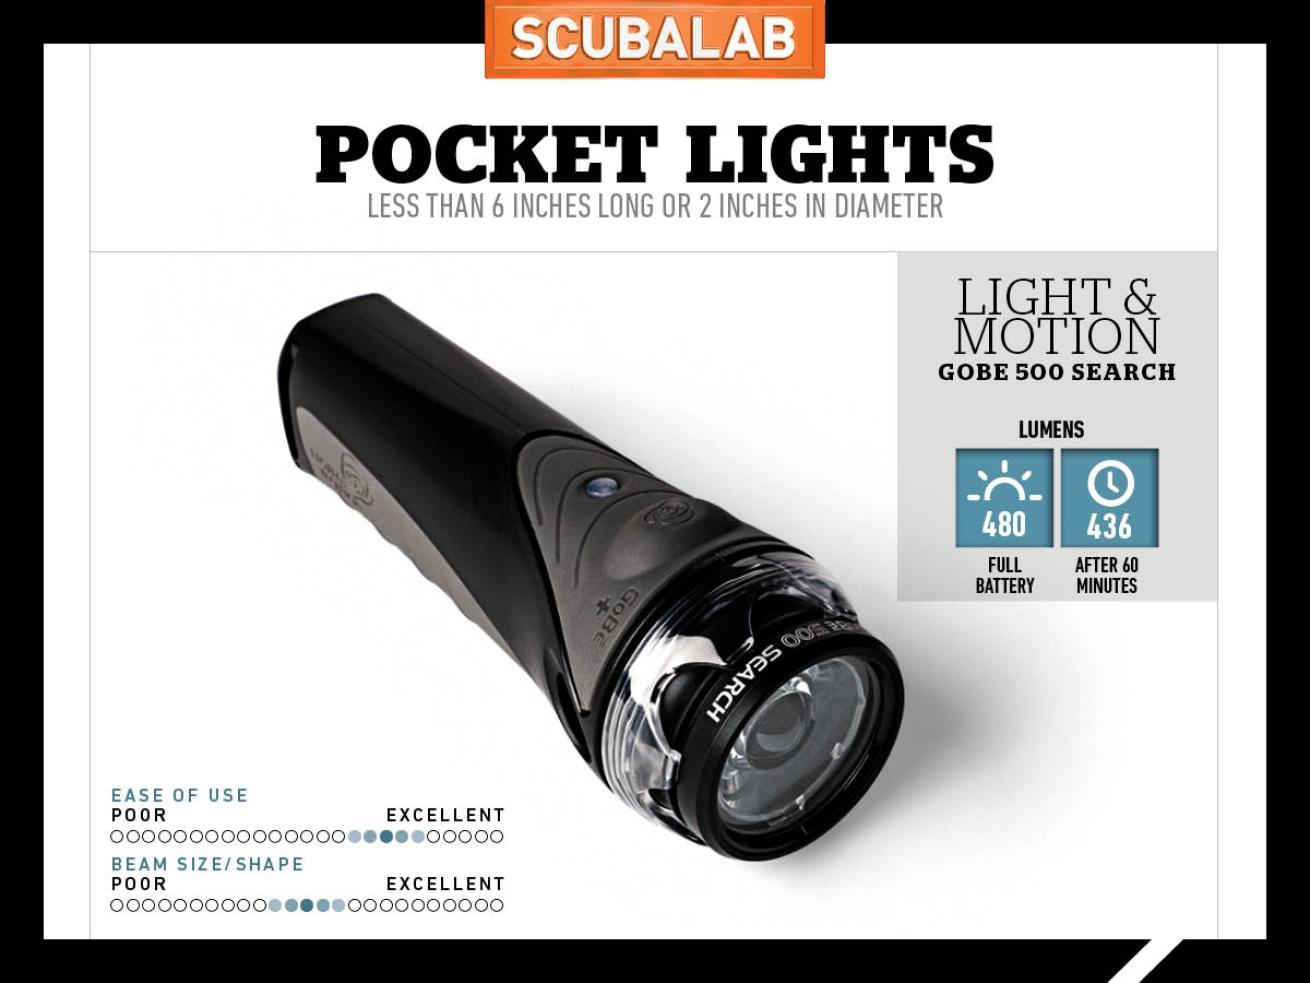 Light and Motion GoBe 500 Search Dive Light Reviewed by ScubaLab